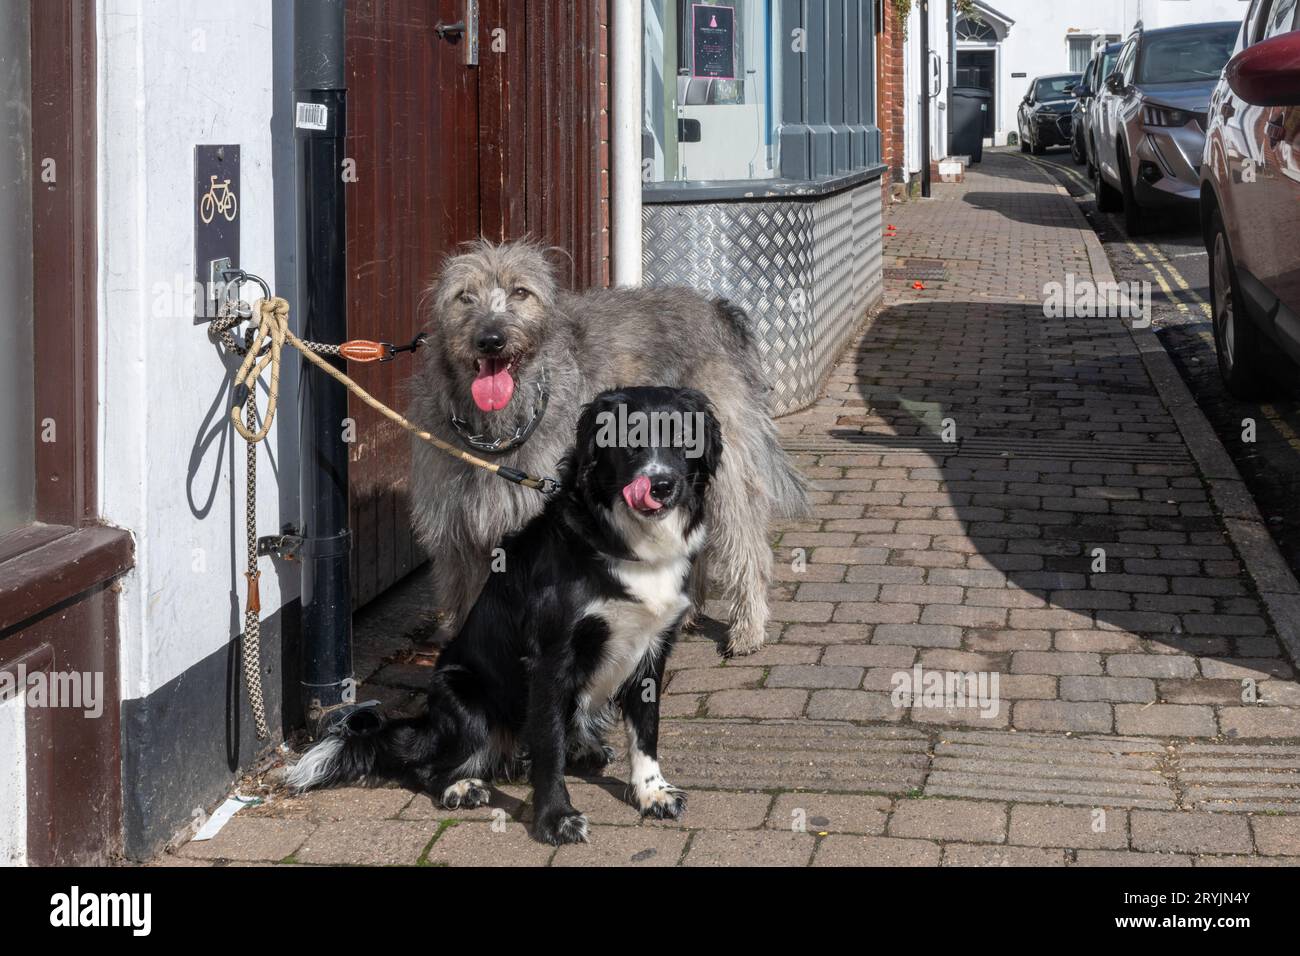 Two dogs tied up outside a shop in Hampshire, England, UK. A border collie and an Irish Wolfhound puppy Stock Photo